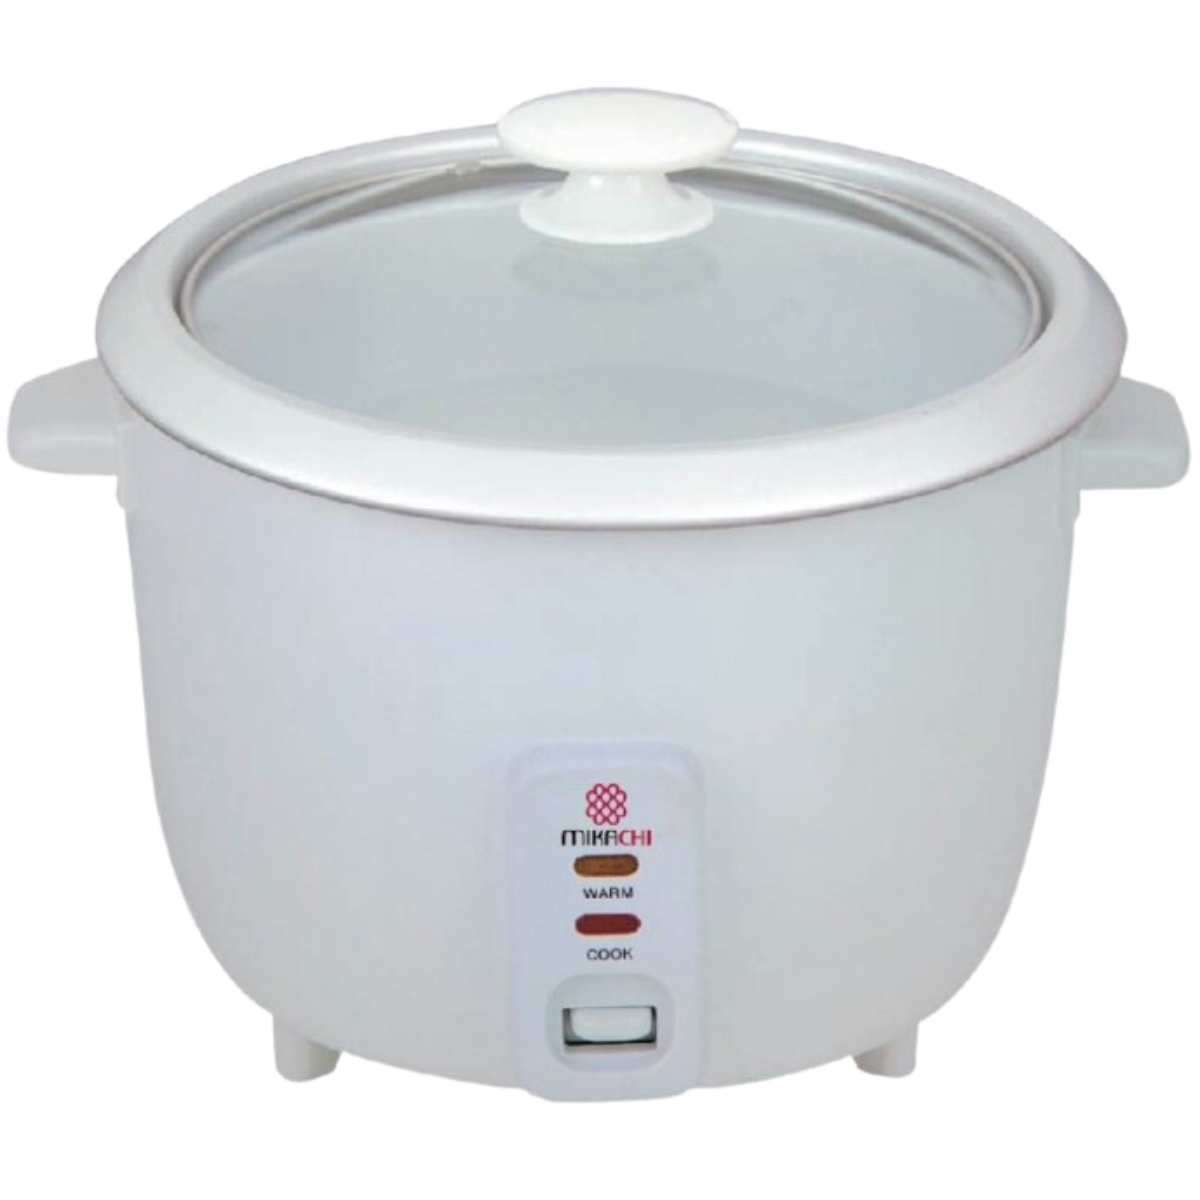 MIKACHI SELRCMRCW2200 RICE COOKER 2.5 LTS WITH STEAMER STAINLESS STEEL